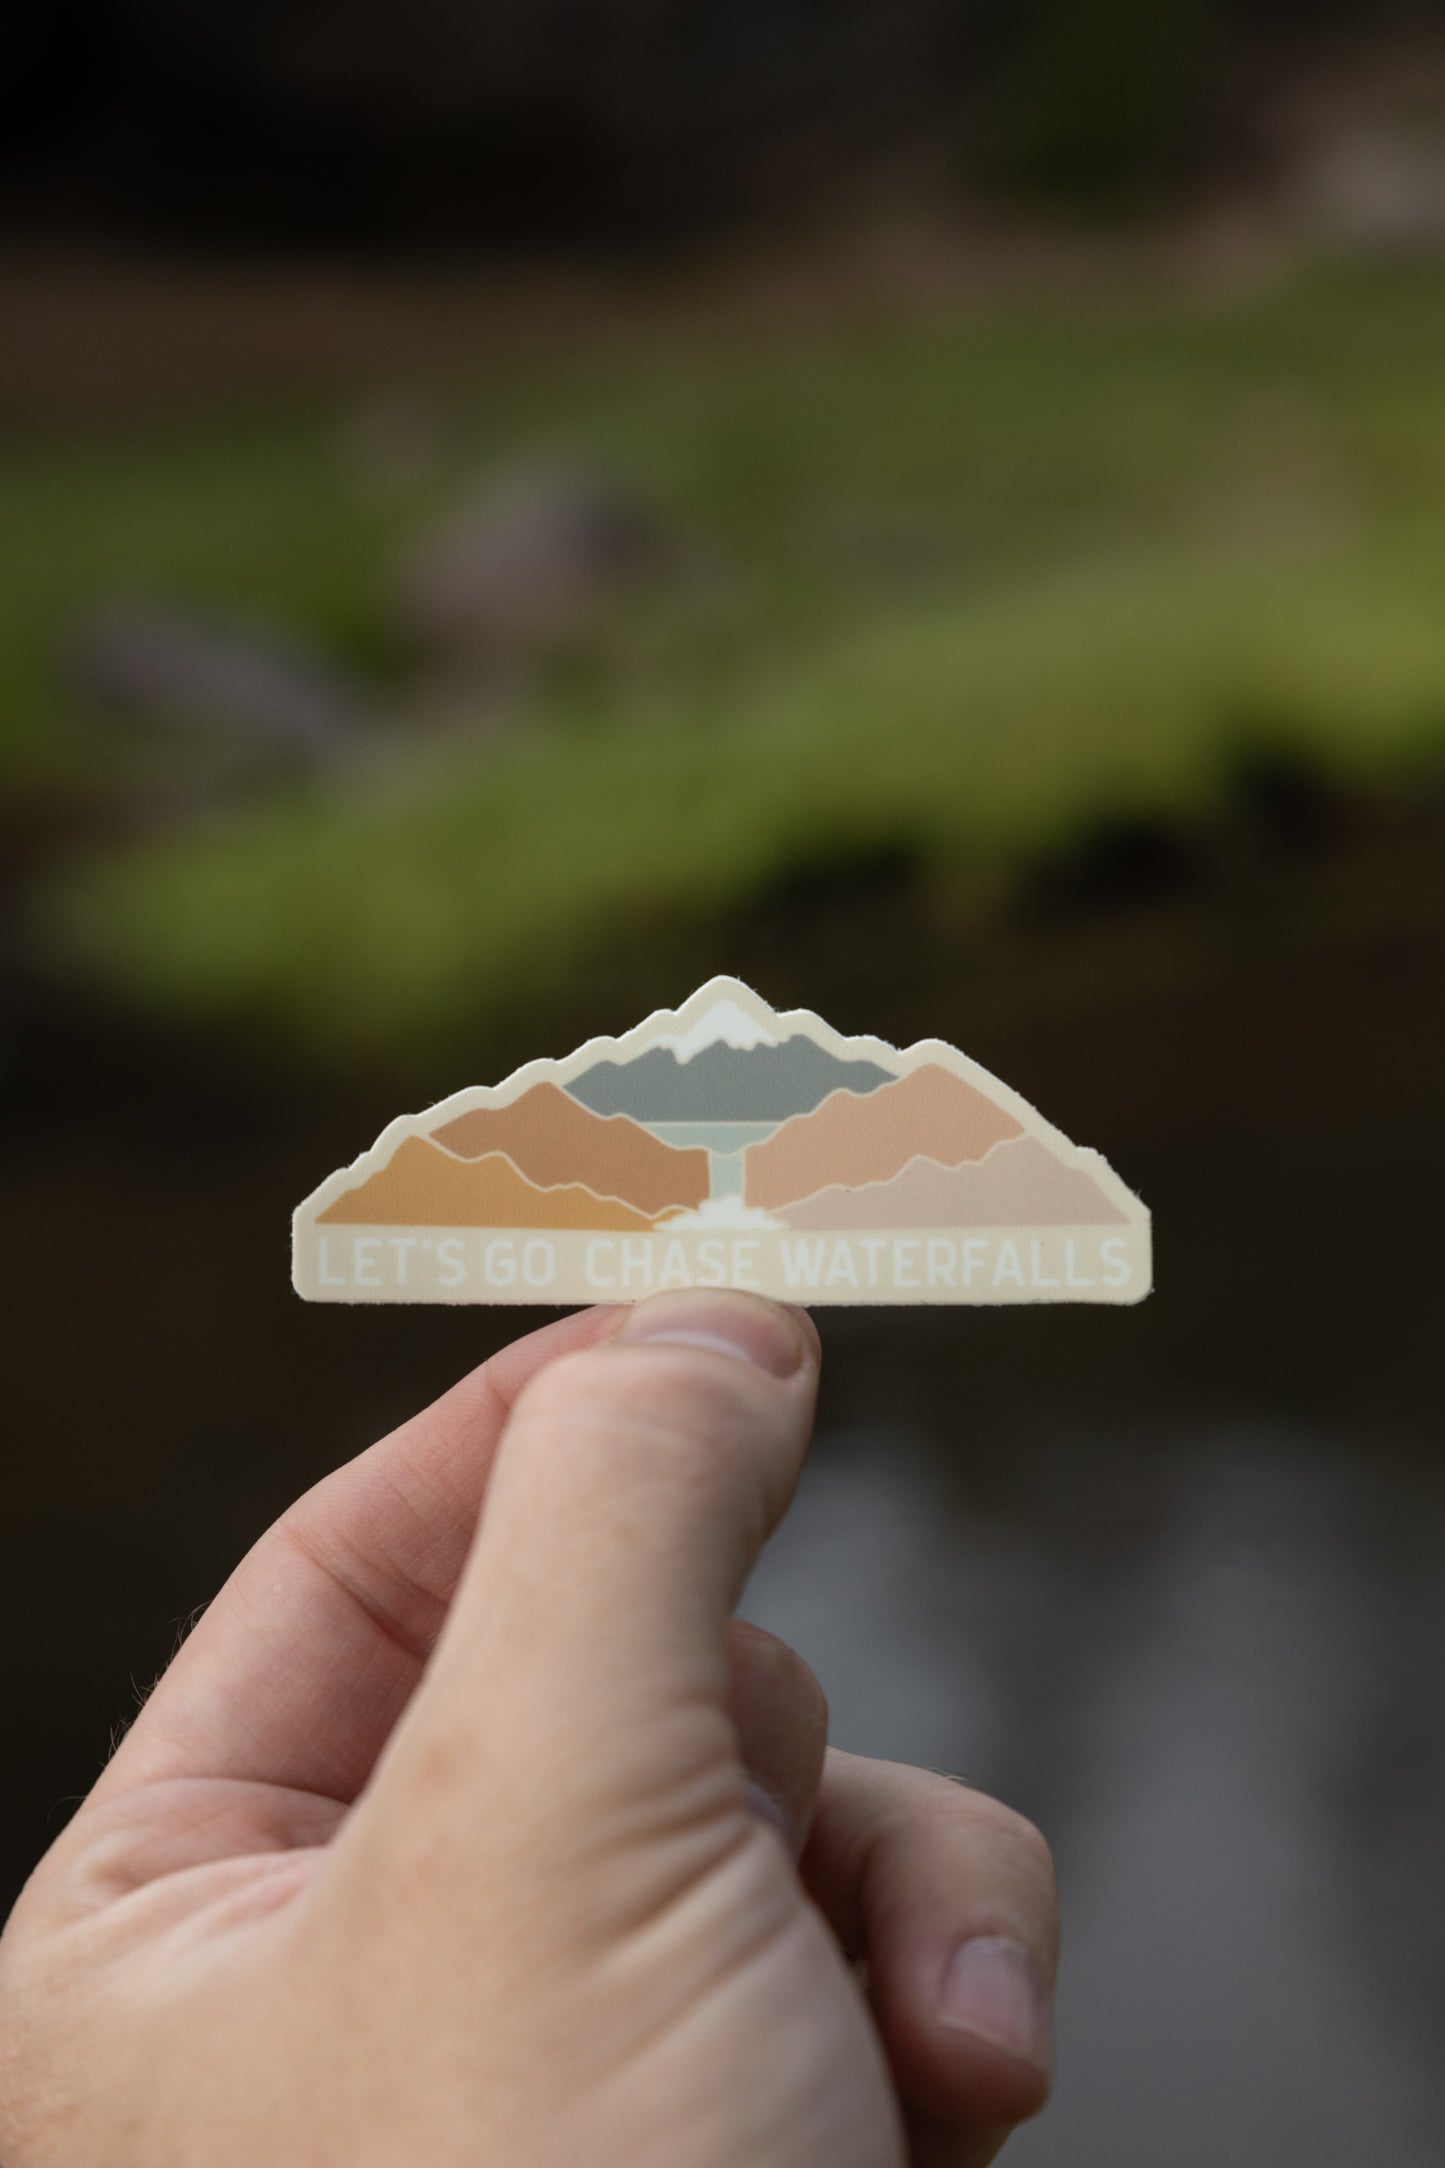 sticker design featuring colorful mountains and a waterfall with the words "Let's Go Chase Waterfalls"